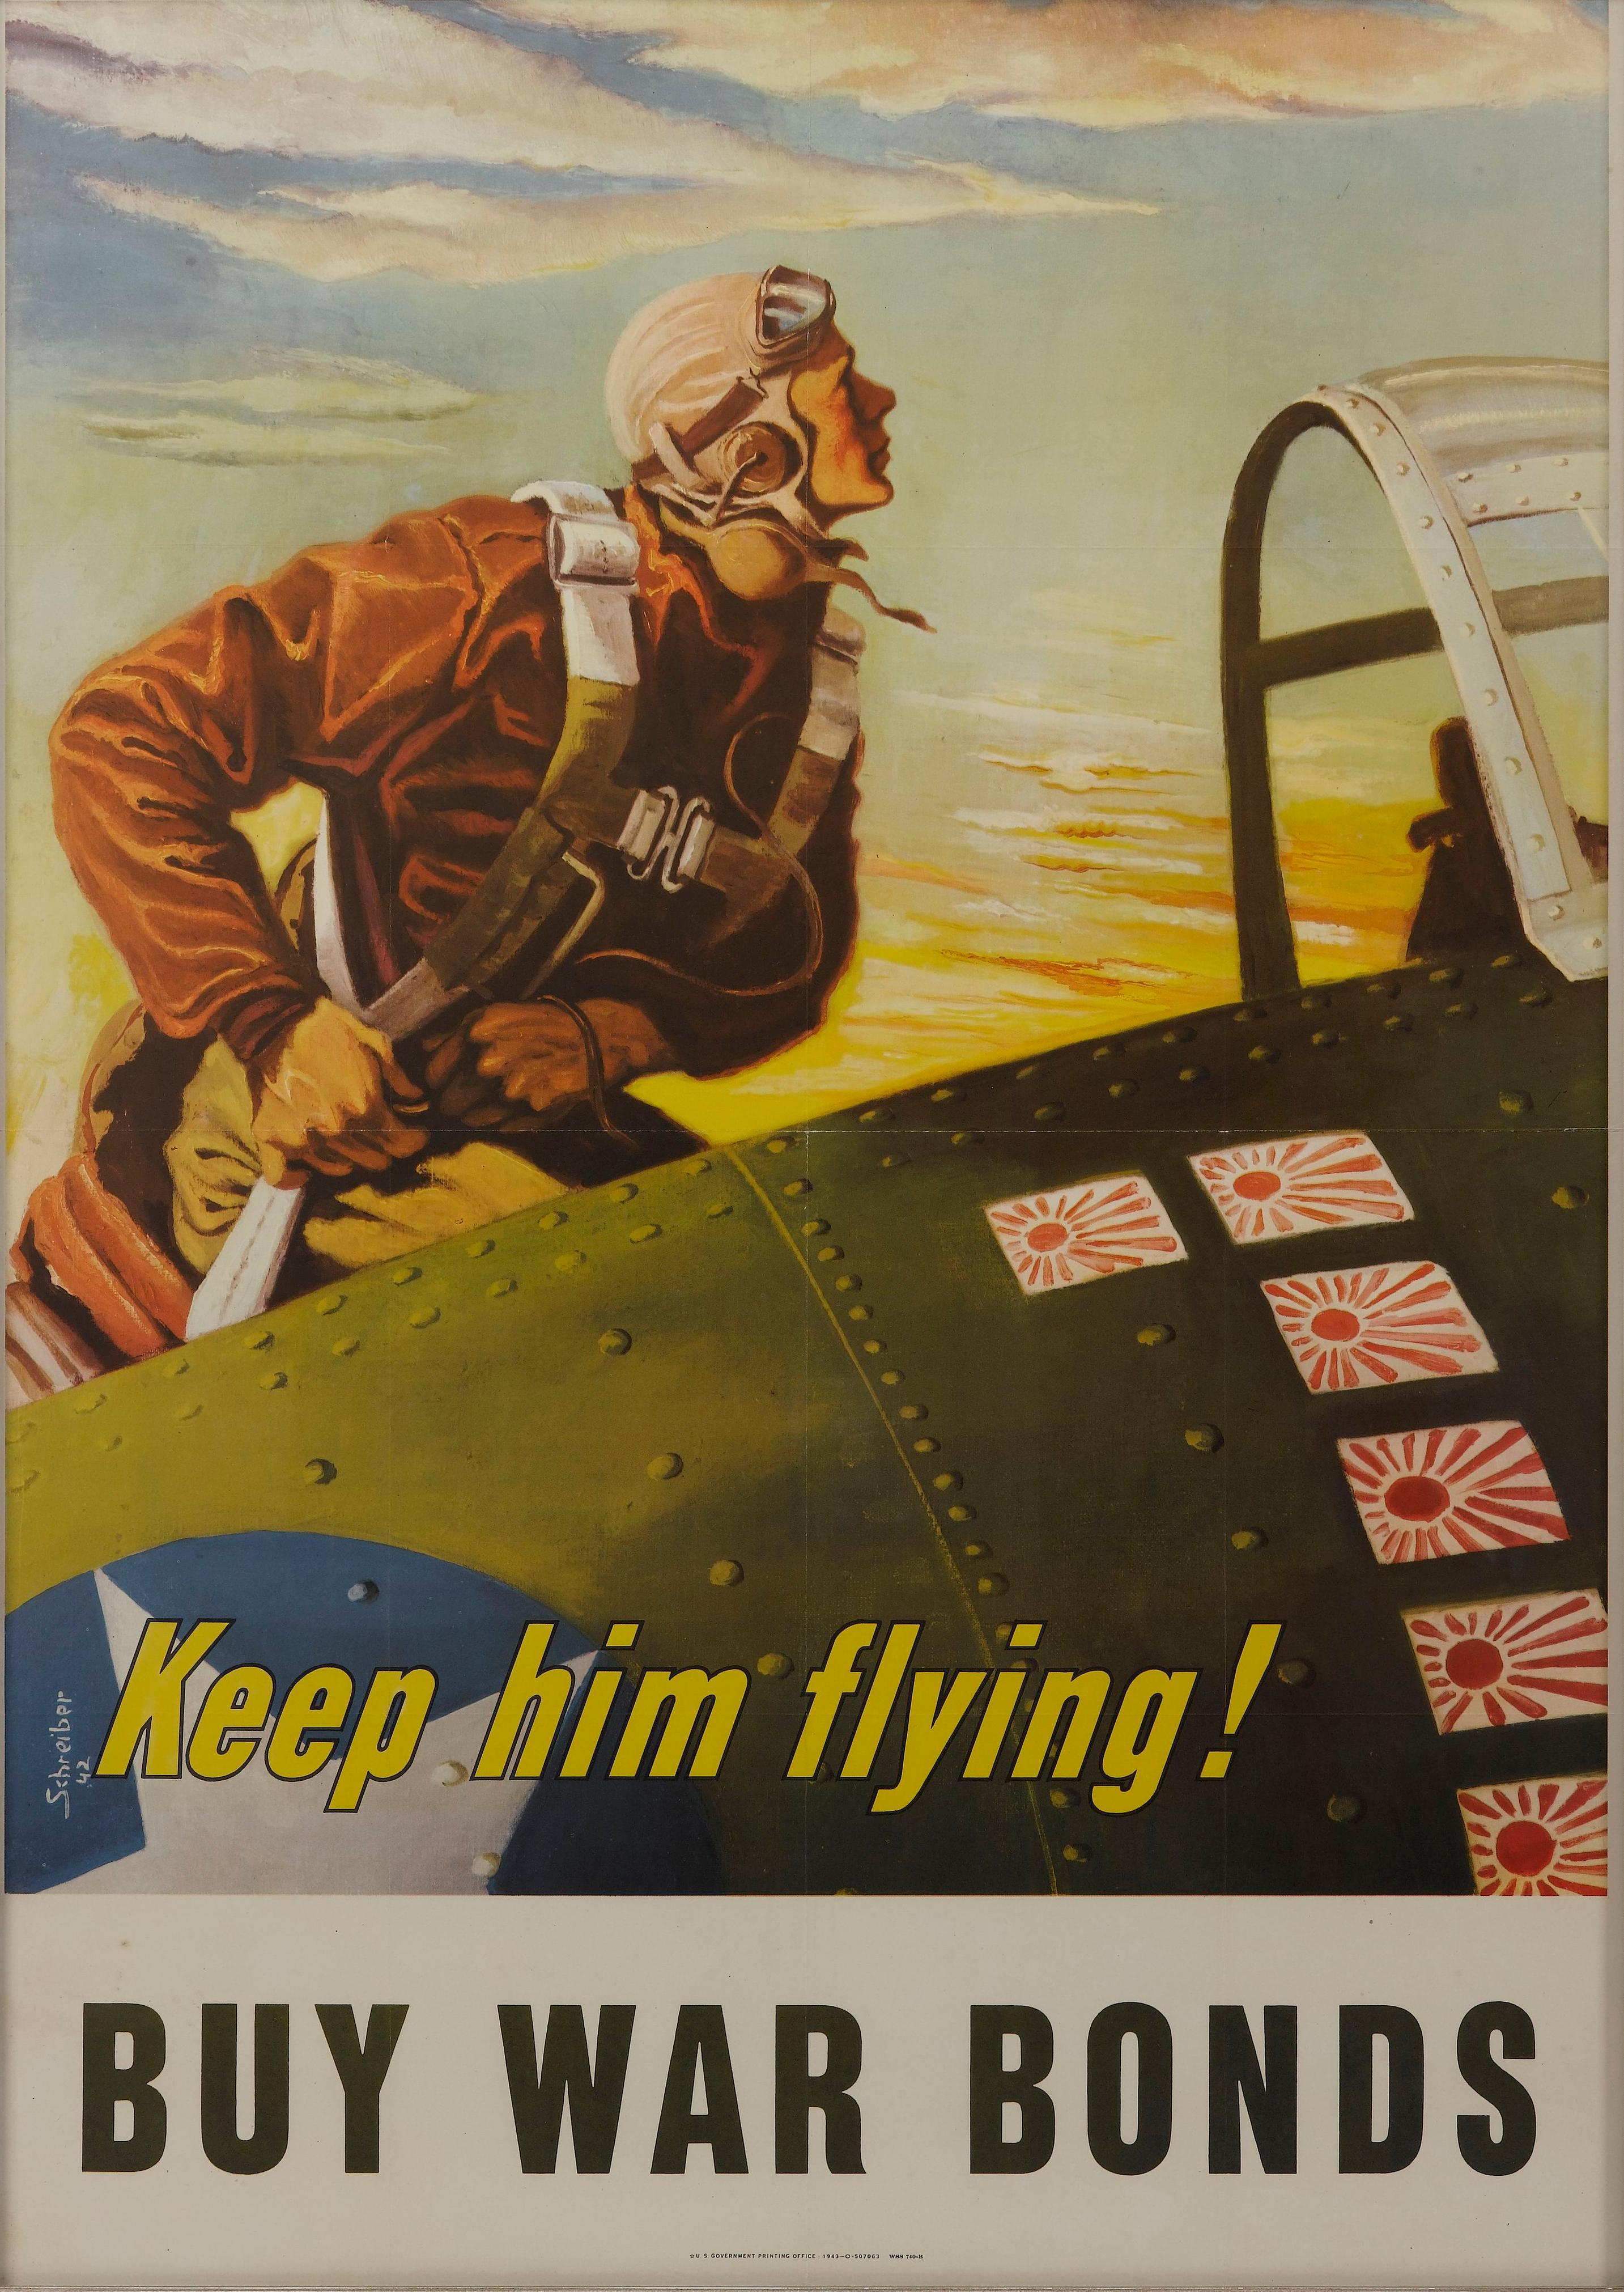 This is an original color World War II propaganda poster, with the art completed by Georges Schreiber. The U.S. Government Printing Office published the poster in 1943. The poster depicts a fighter pilot preparing to get in his plane. The pilot